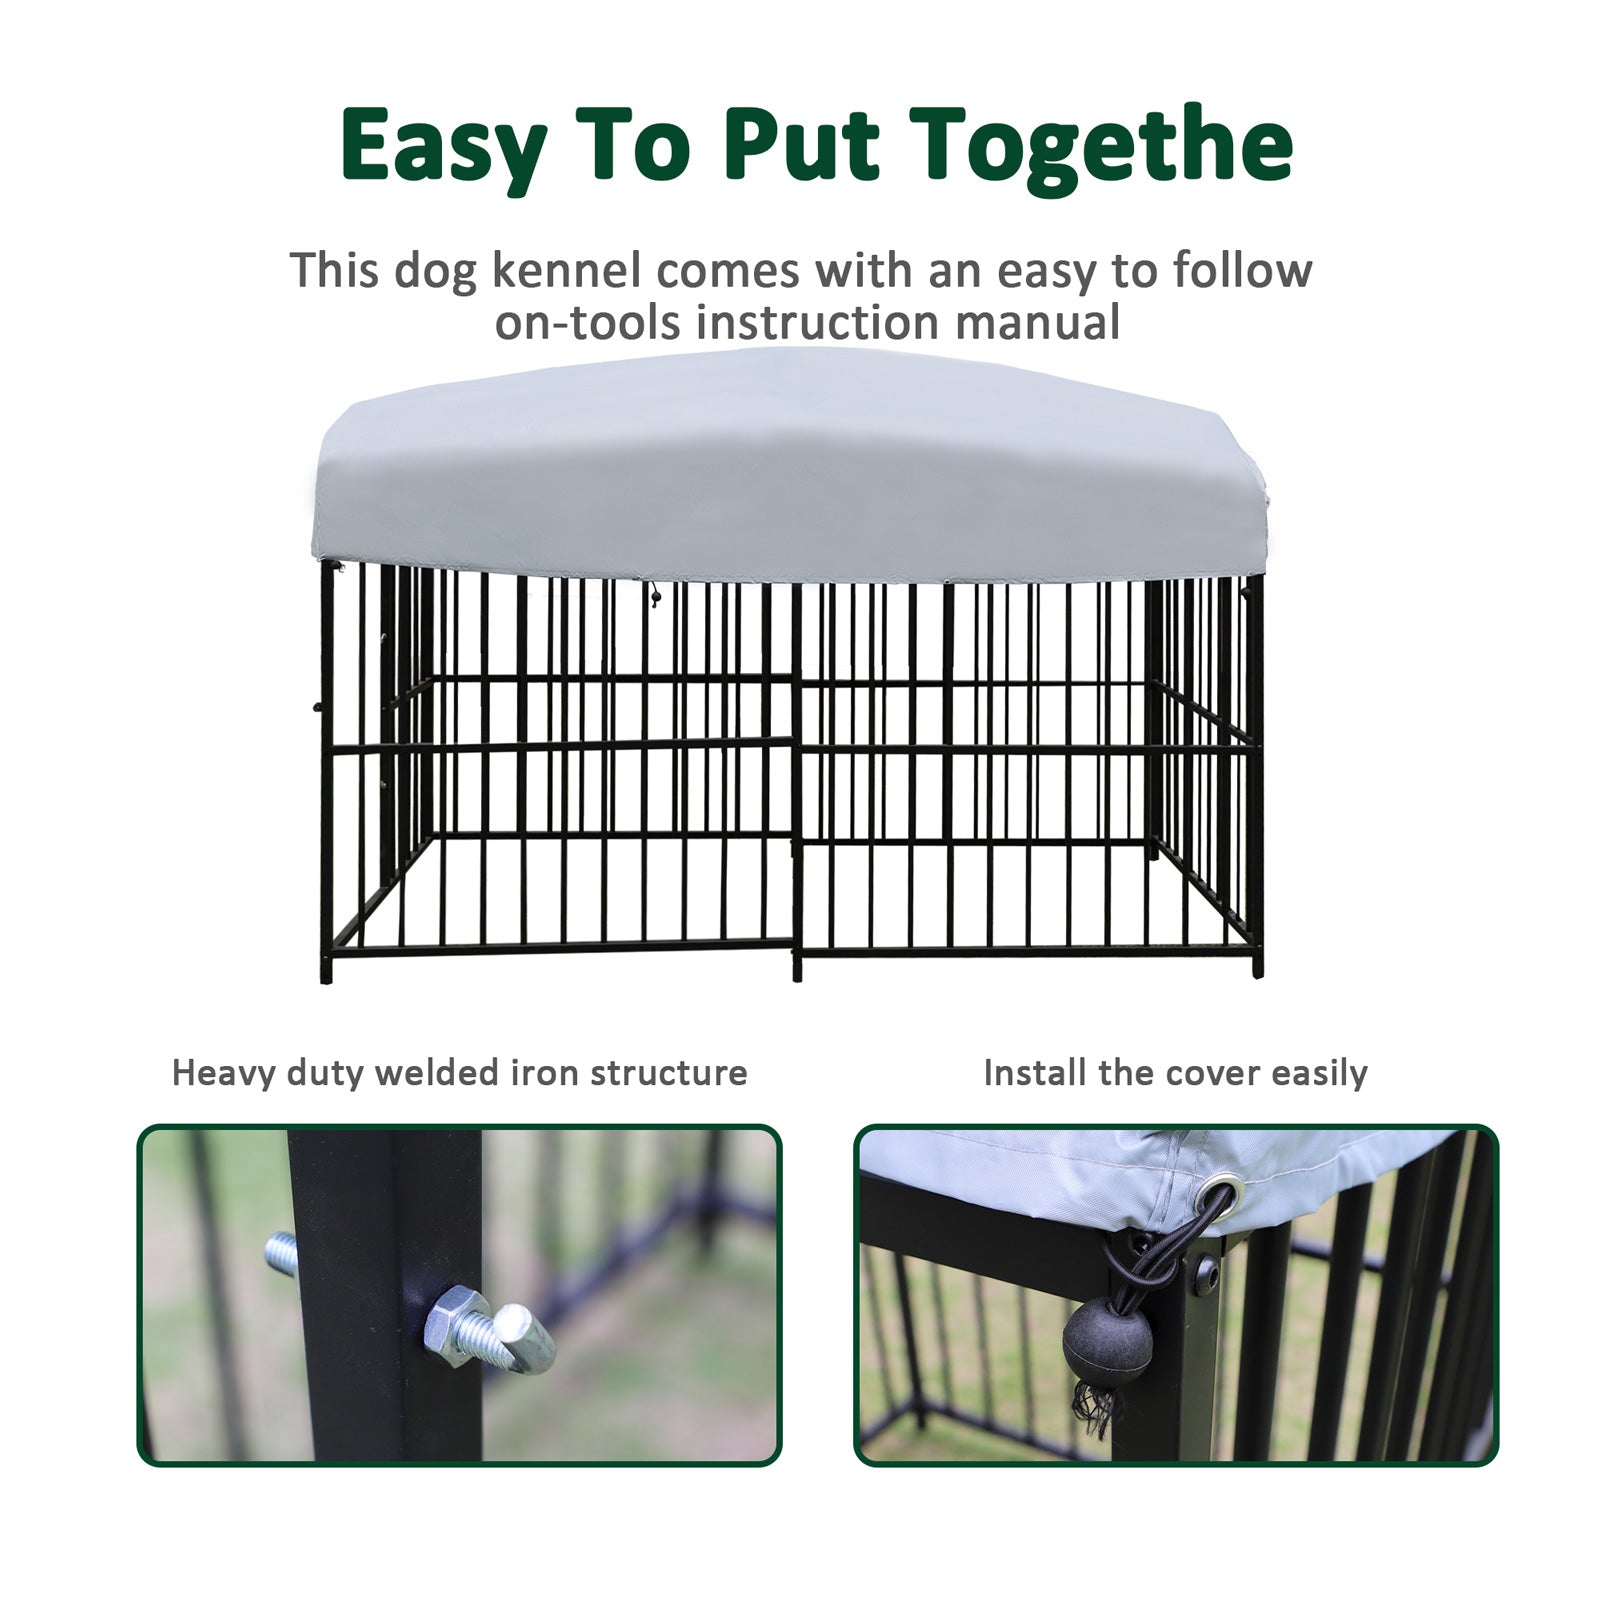 7.8'x4'x5' Large Dog Outdoor Kennel Pet Playpen with Waterproof Cover and Secure Lock, Black